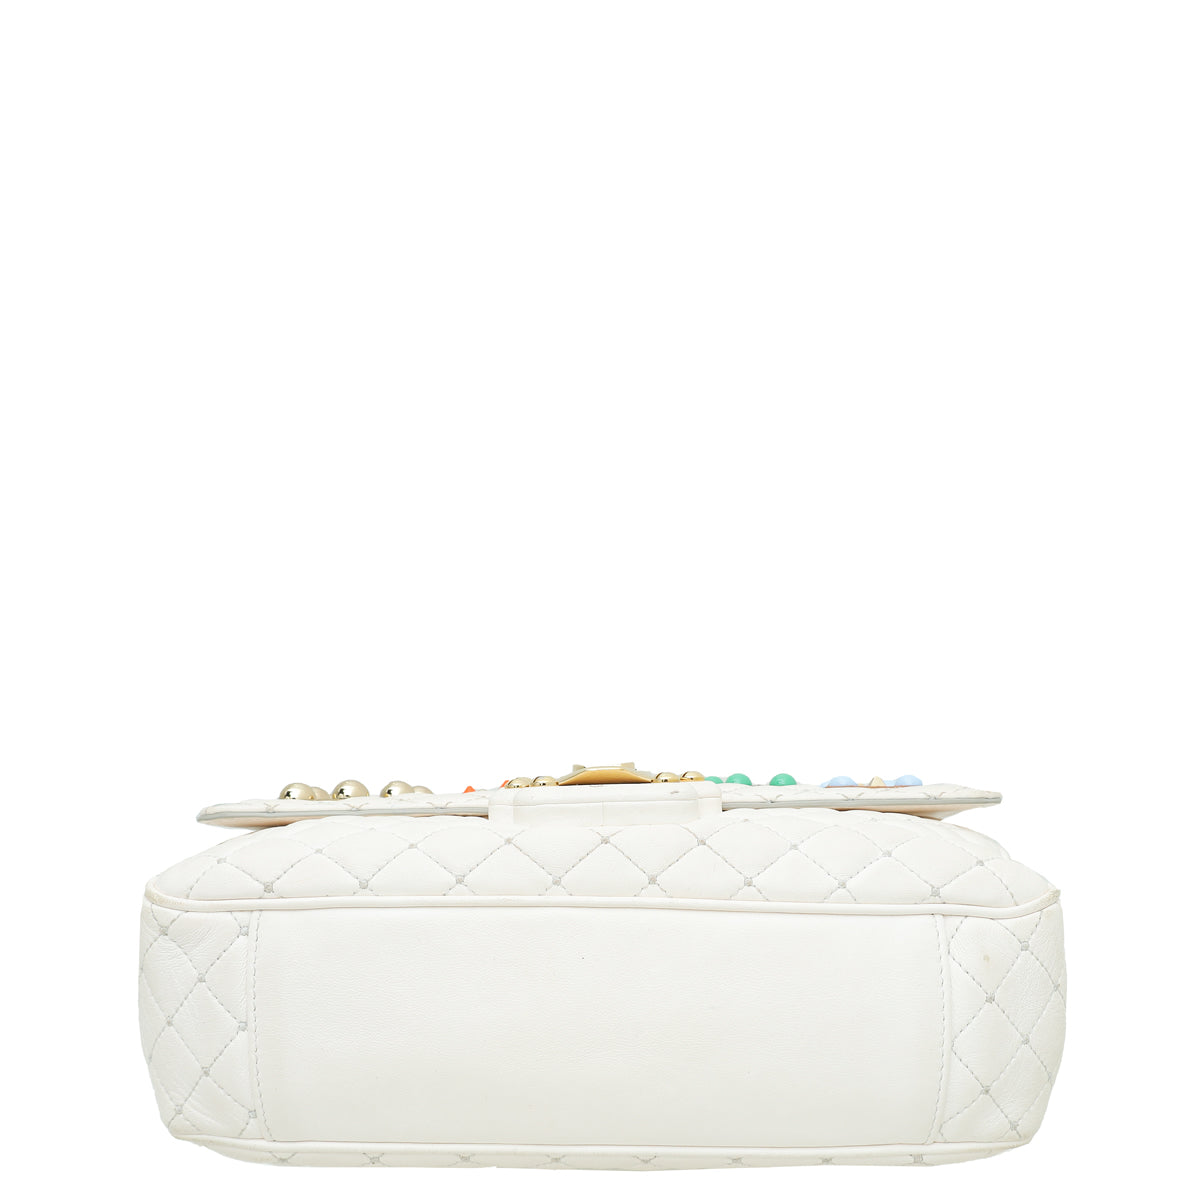 Dolce & Gabbana White Multicolor "Dolce" Studded Lucia Bag